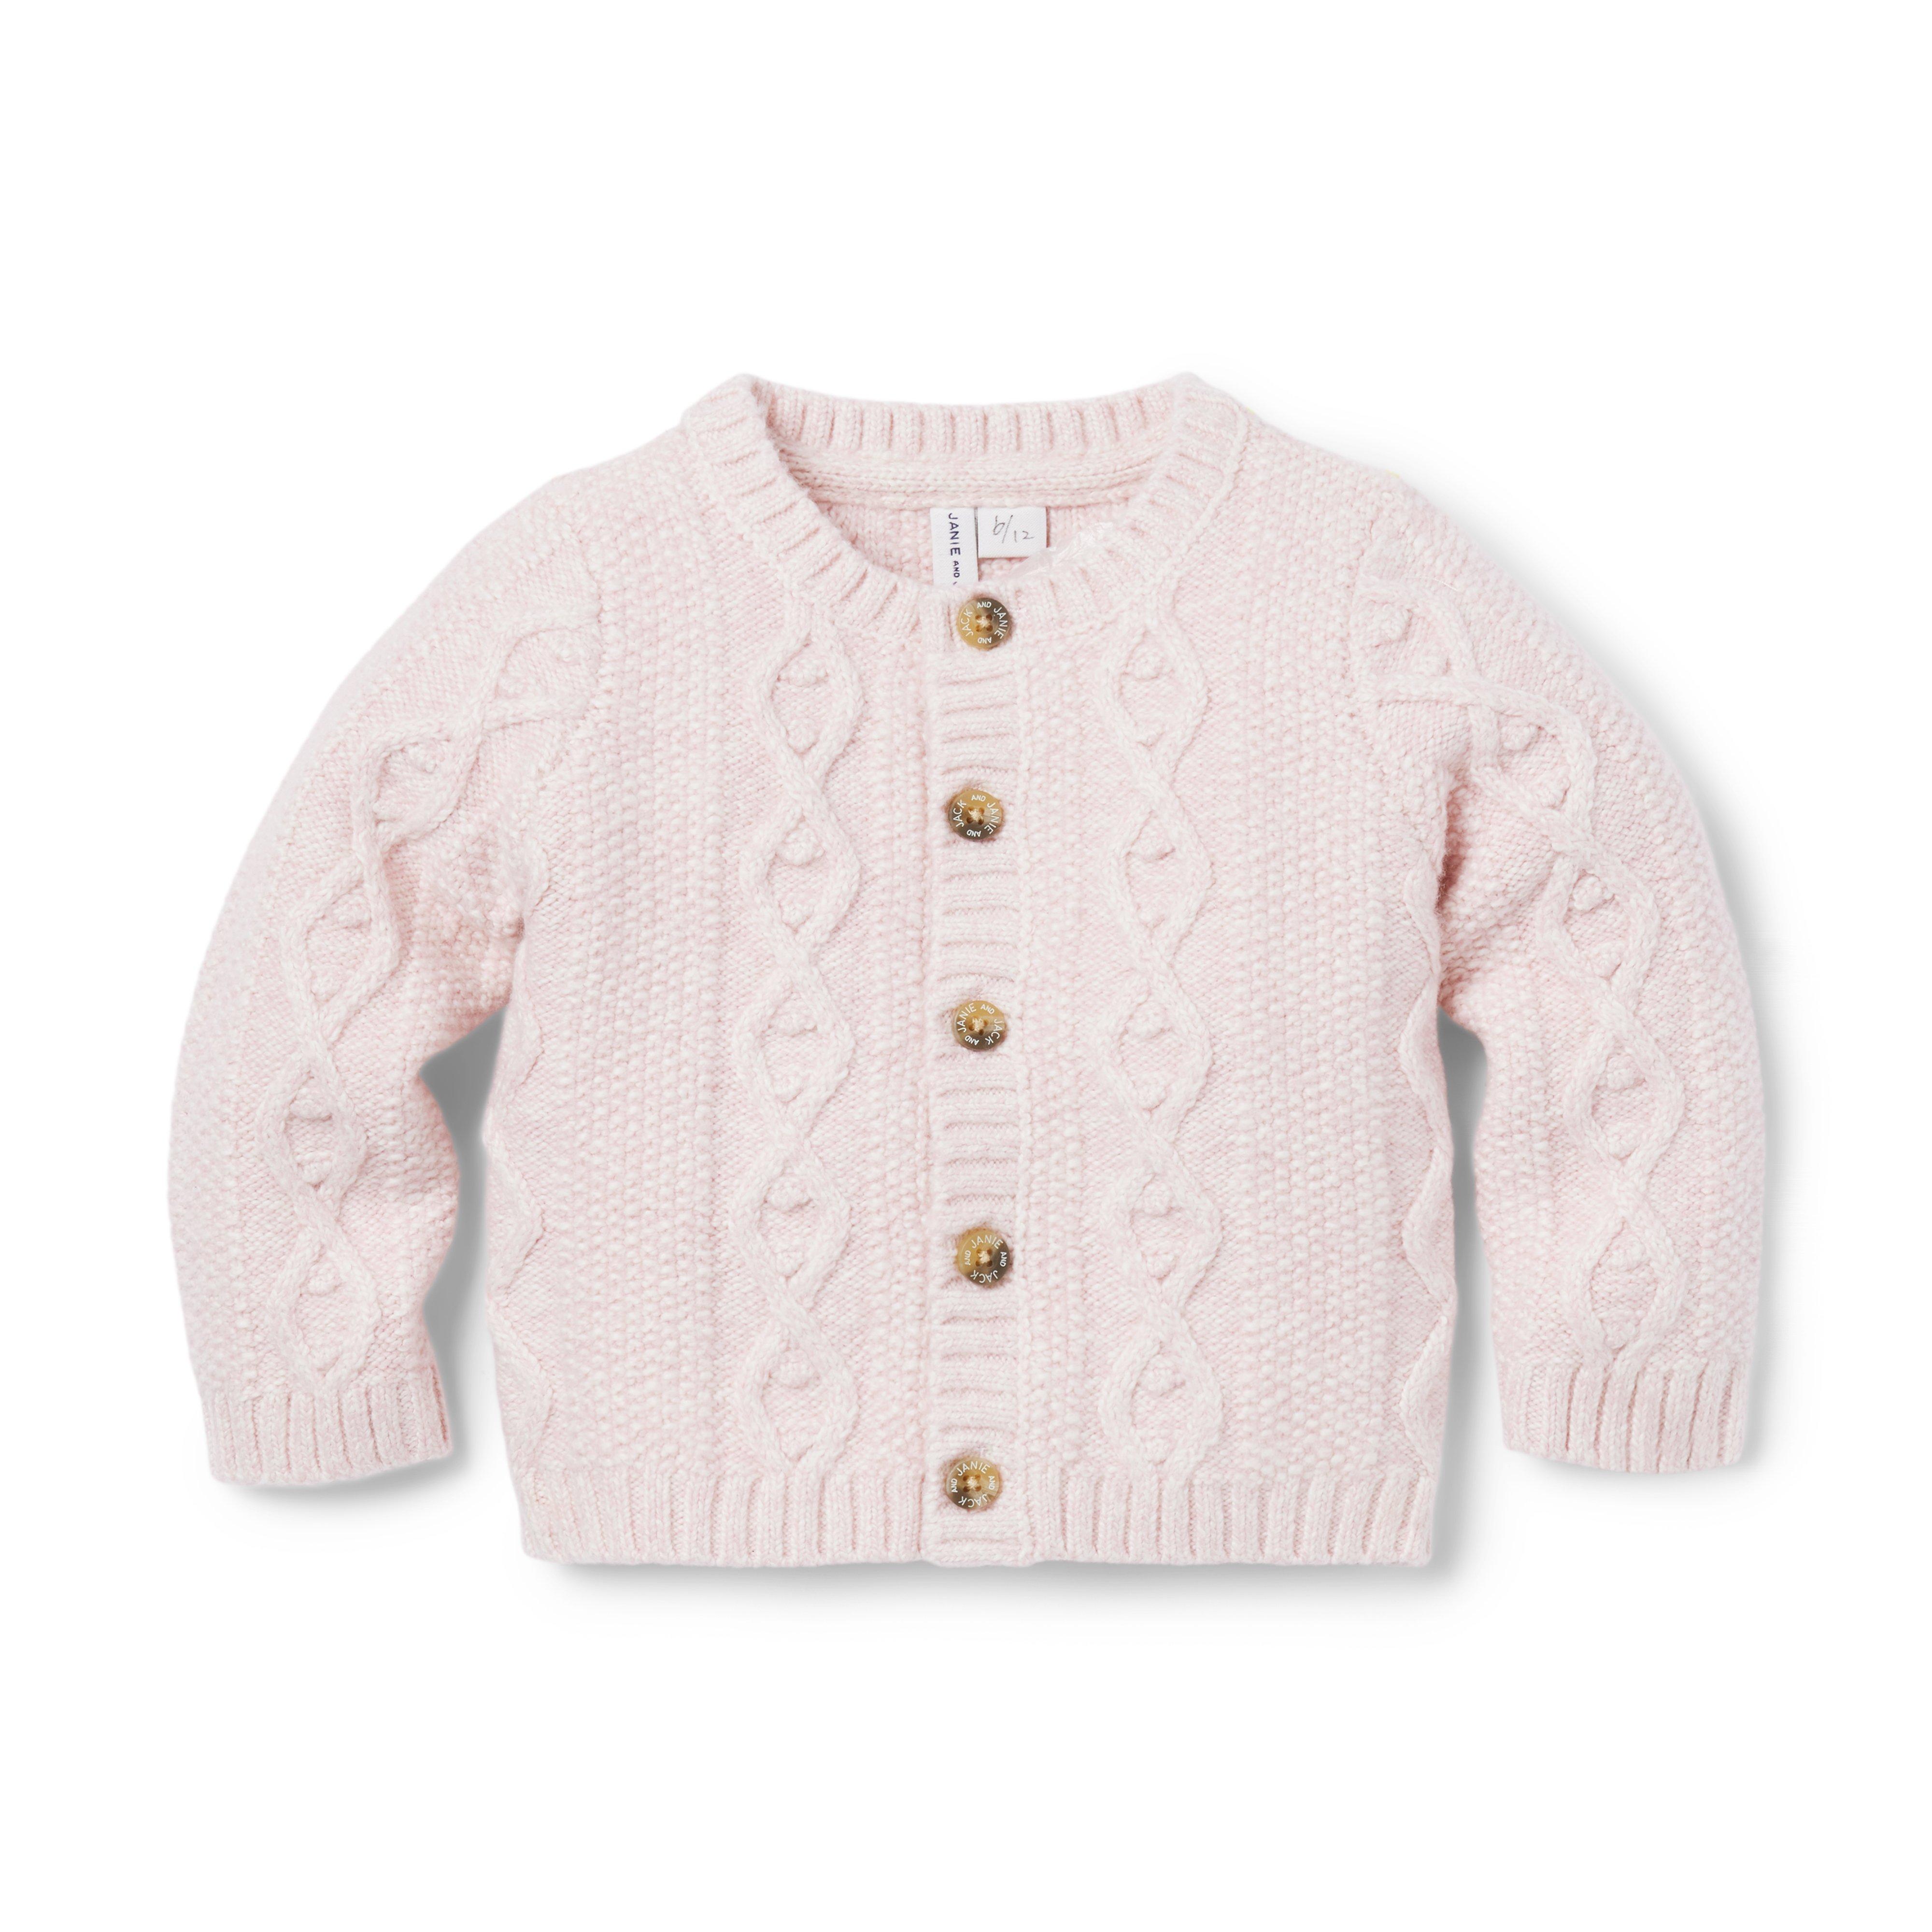 The Cozy Cable Knit Baby Cardigan 